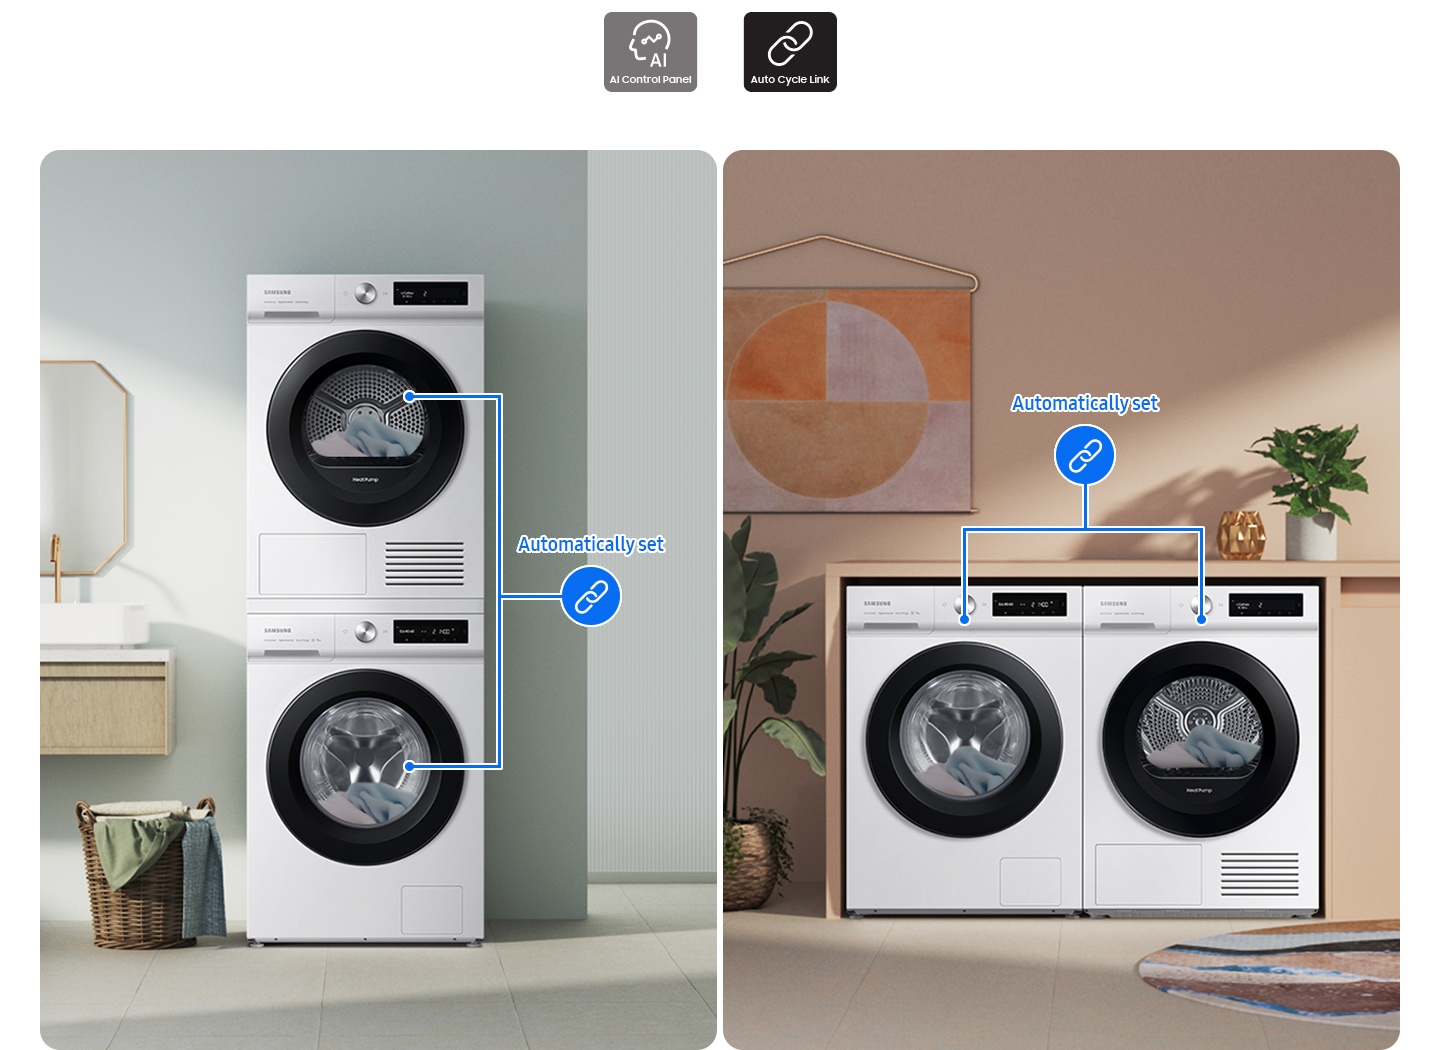 Two sets of washers and dryers are placed differently in two separate living spaces. Drying cycles является автоматический набор.